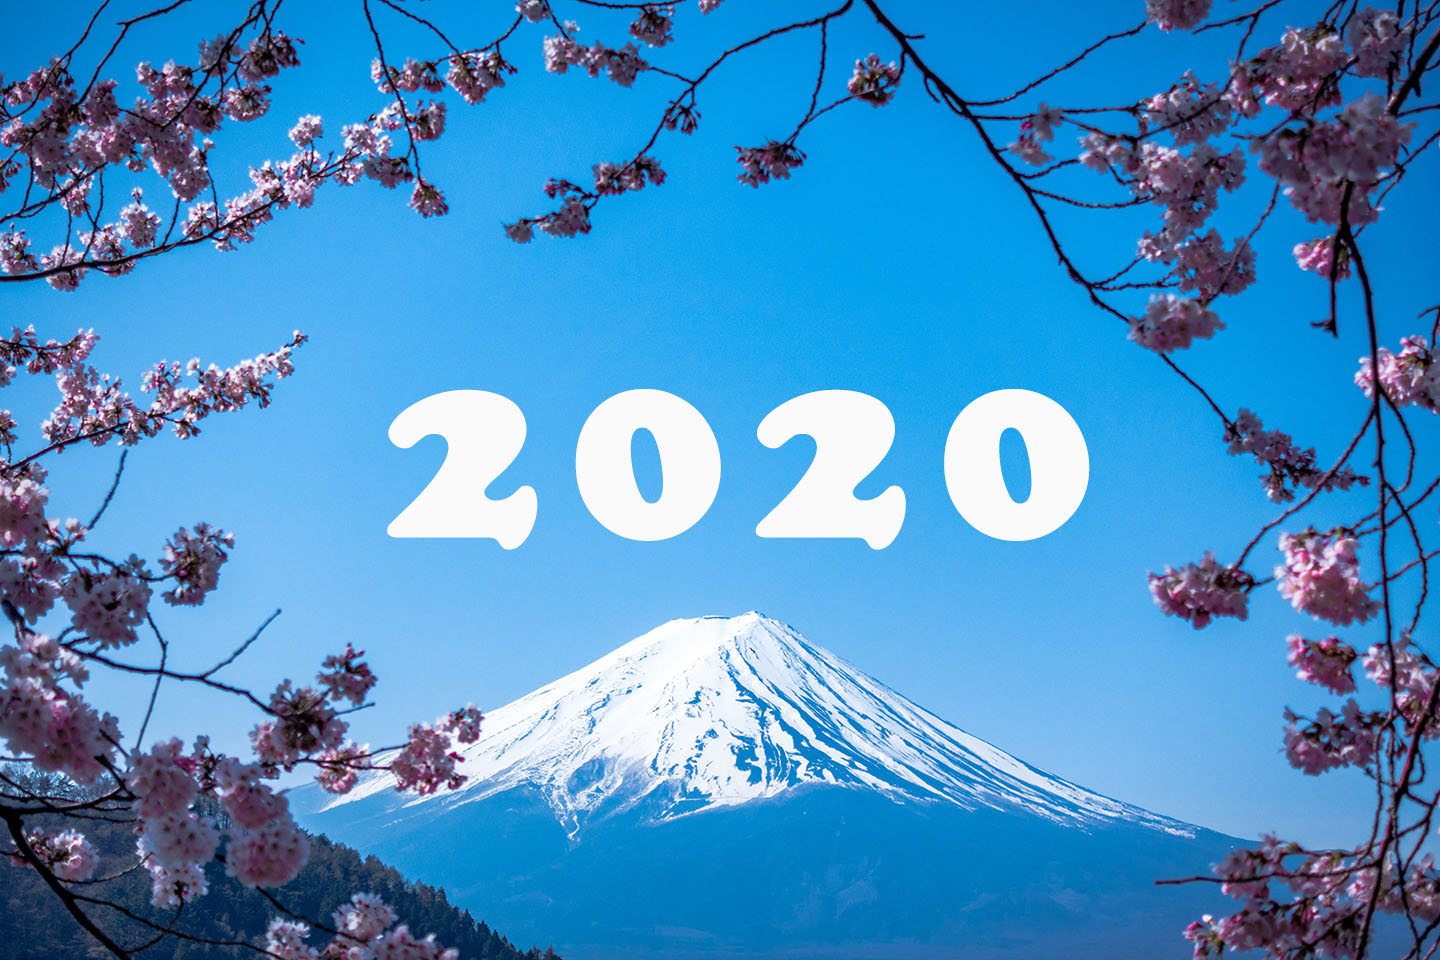 Reflecting Back the Trends of 2020 in Japan